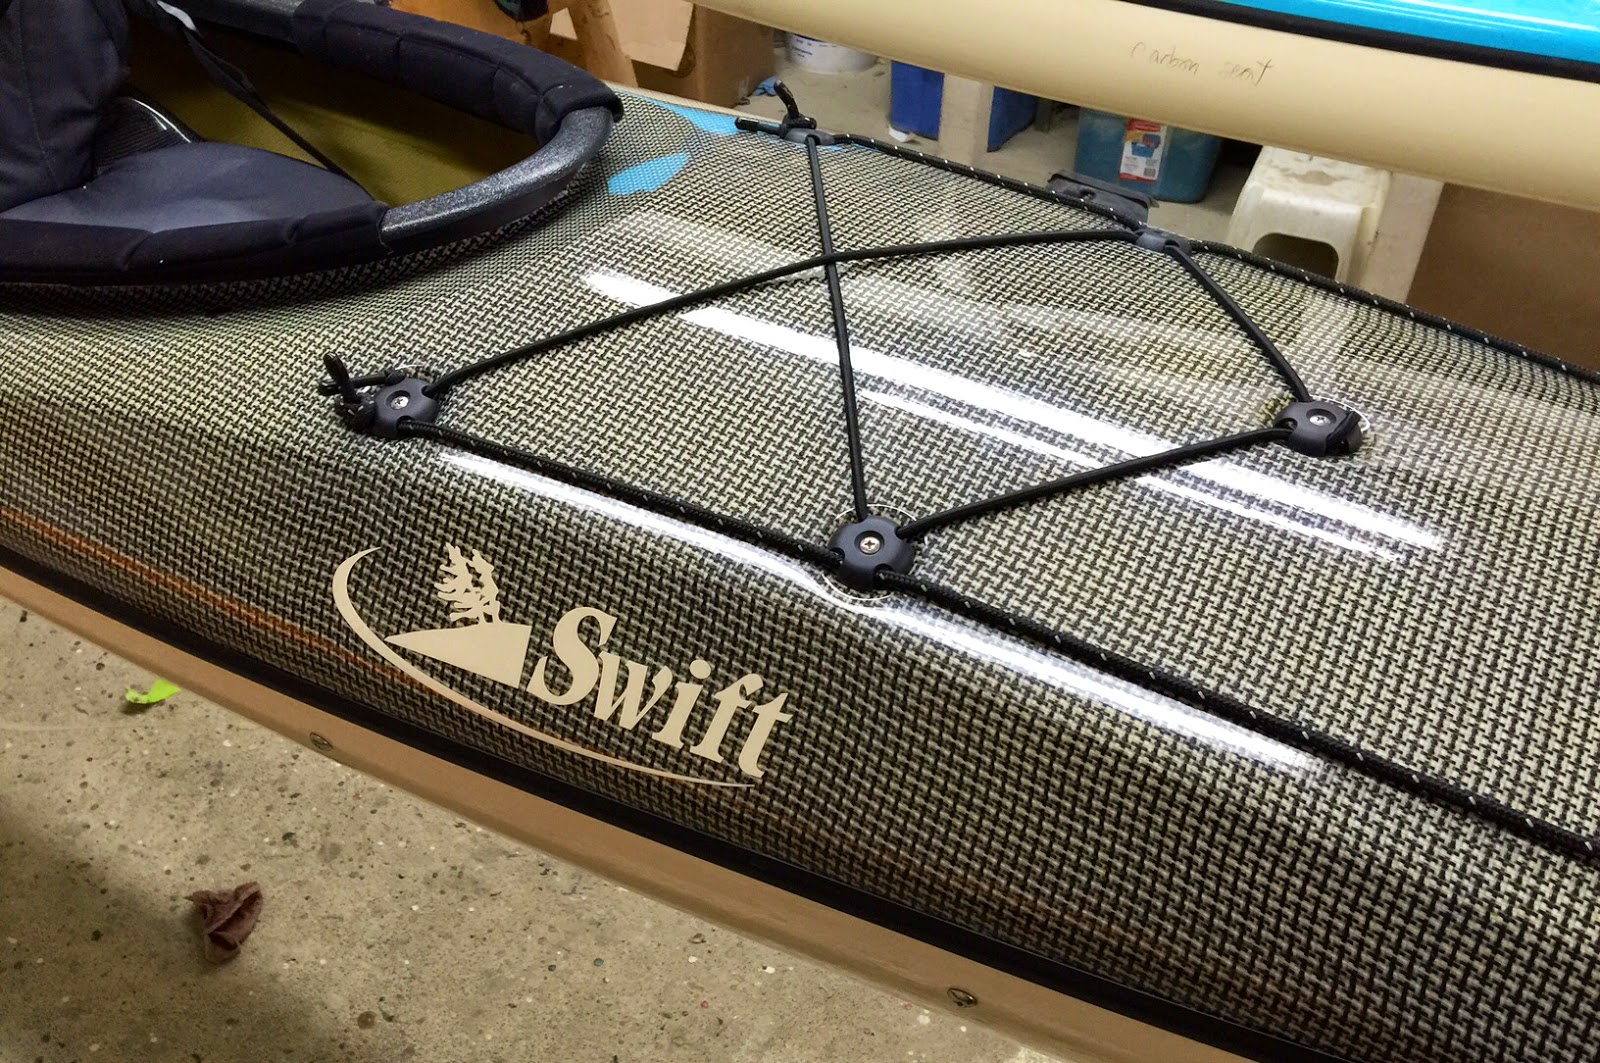 swift outdoor centre: welcome to the 2015 swift canoe